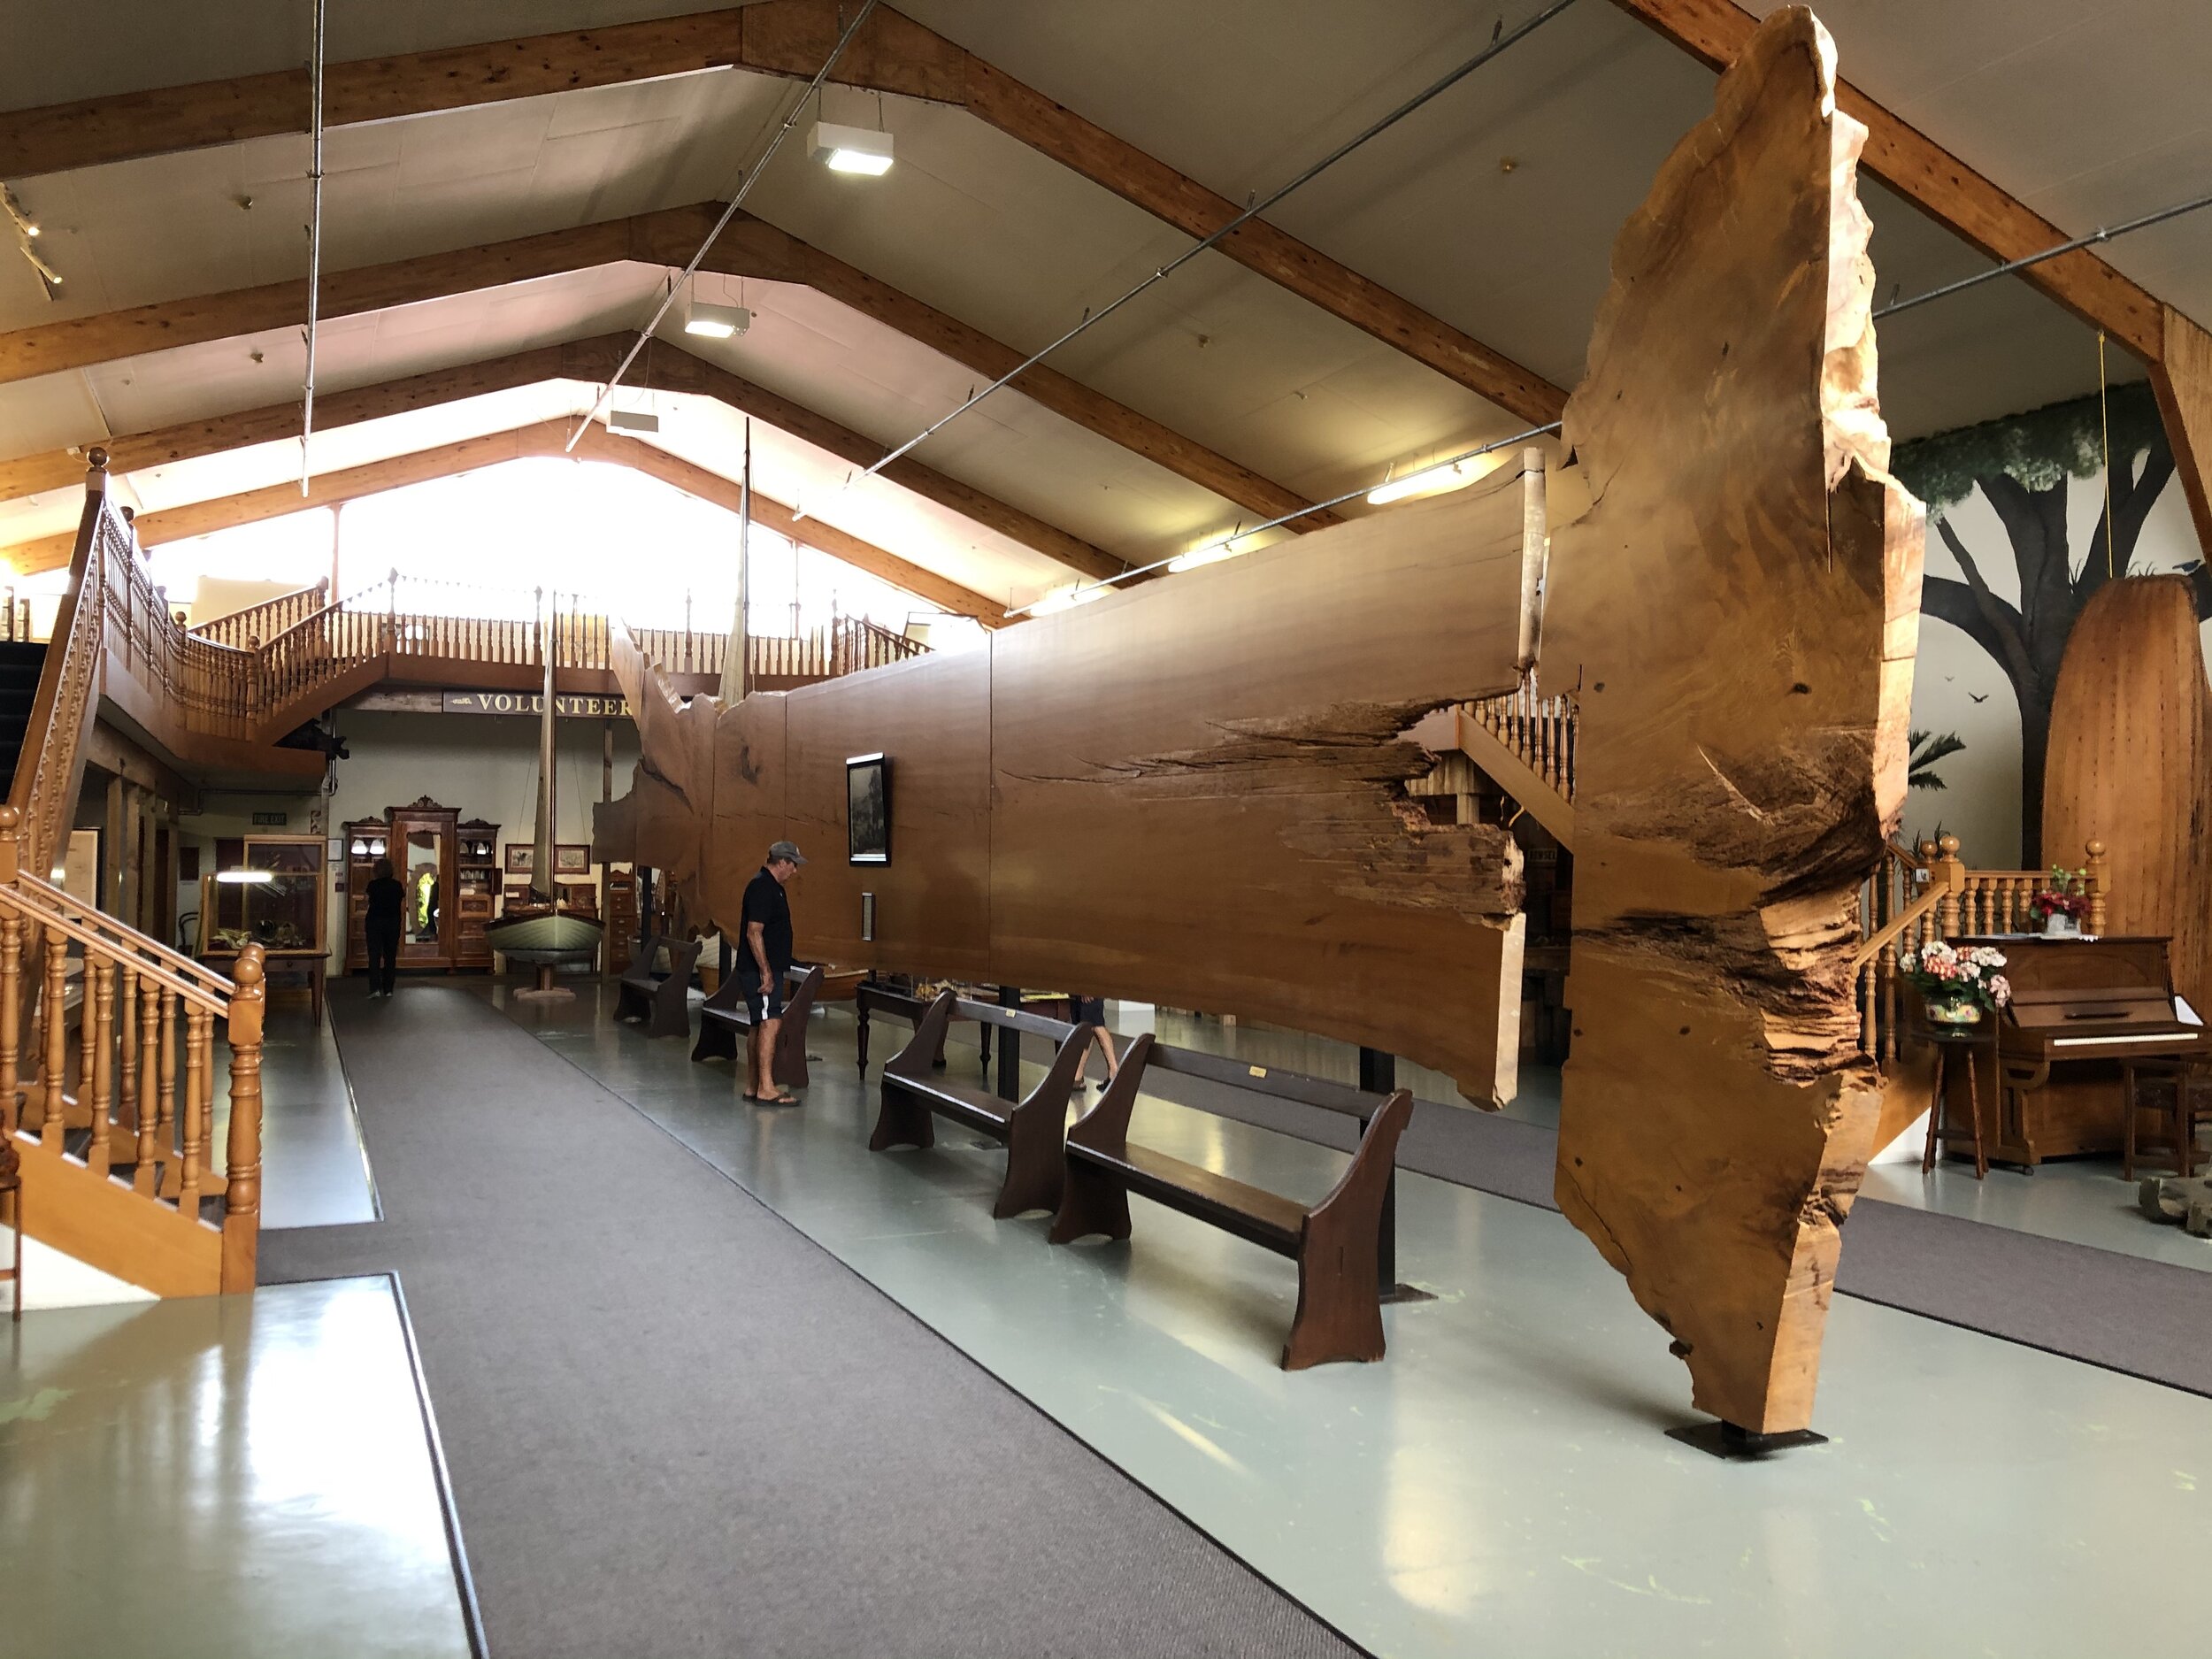  The Kauri Museum in Matakohe ( https://www.kaurimuseum.com ) tells the story of the extensive logging of the original kauri resources of the Northlands from technological and cultural perspectives. These trees may live for a millennium or more and w